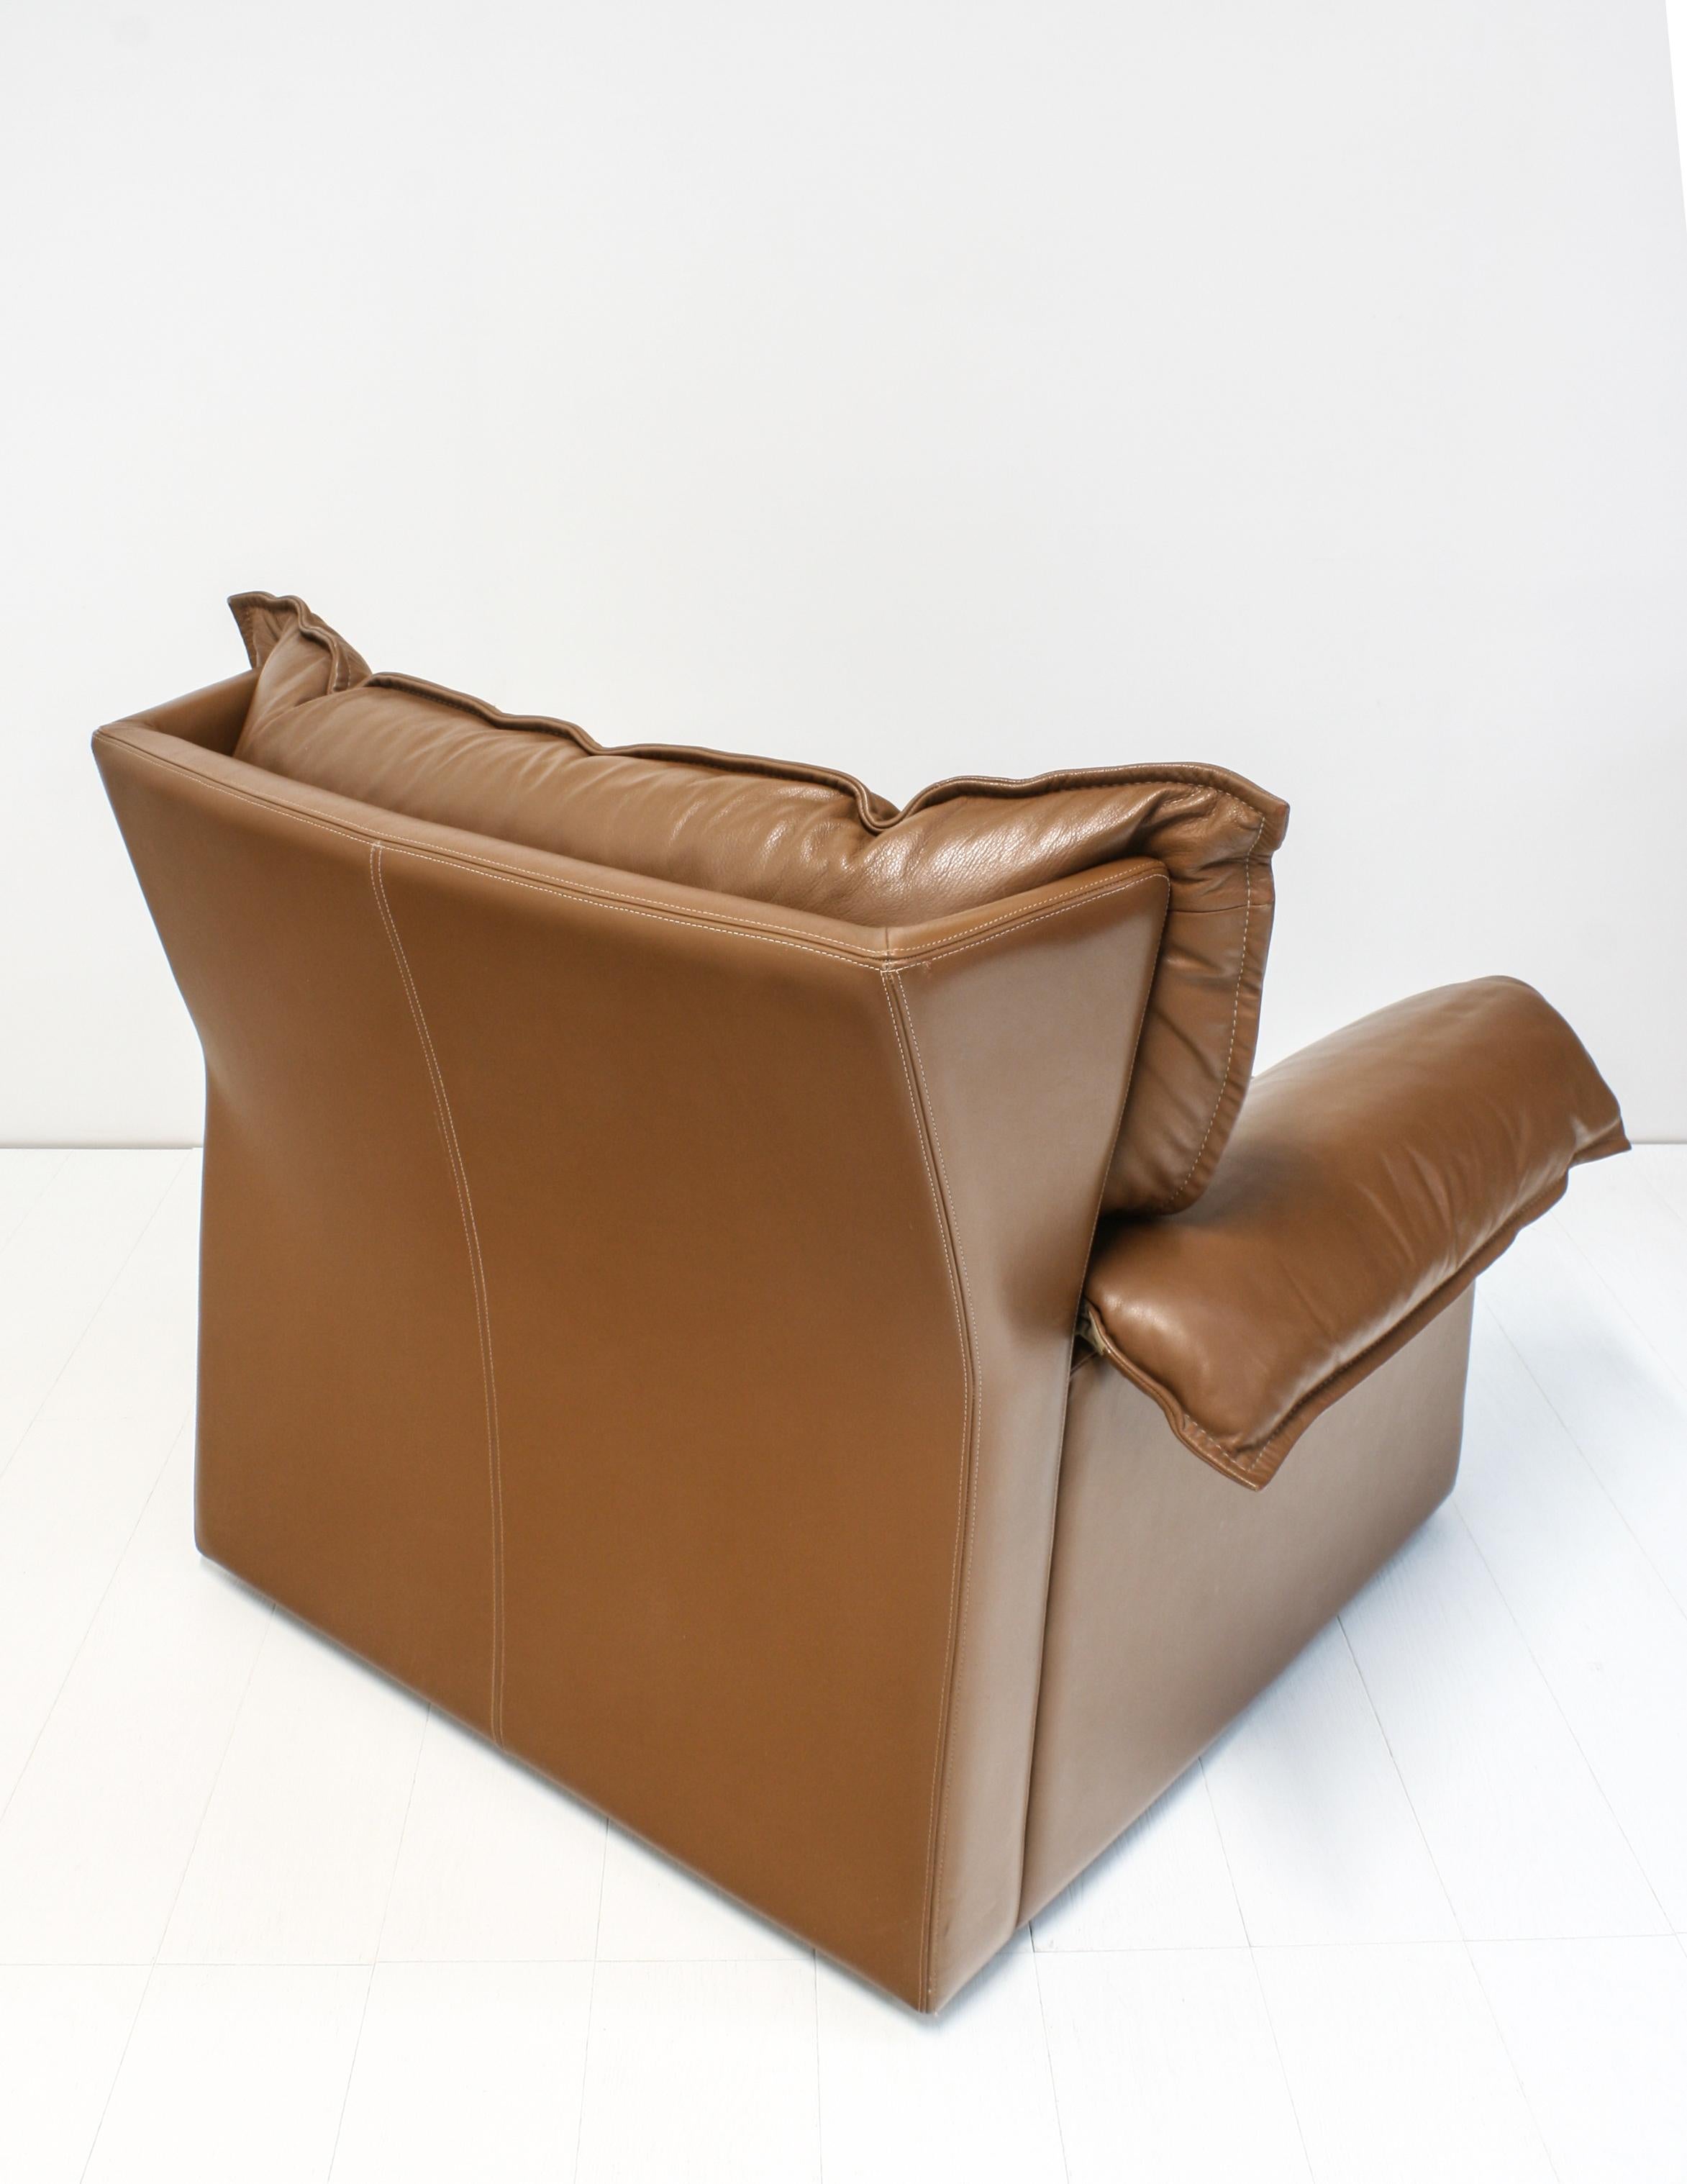 Stylish Leather Downfilled Wingback Armchairs by Durlet, 1970s, Set of 2 For Sale 6